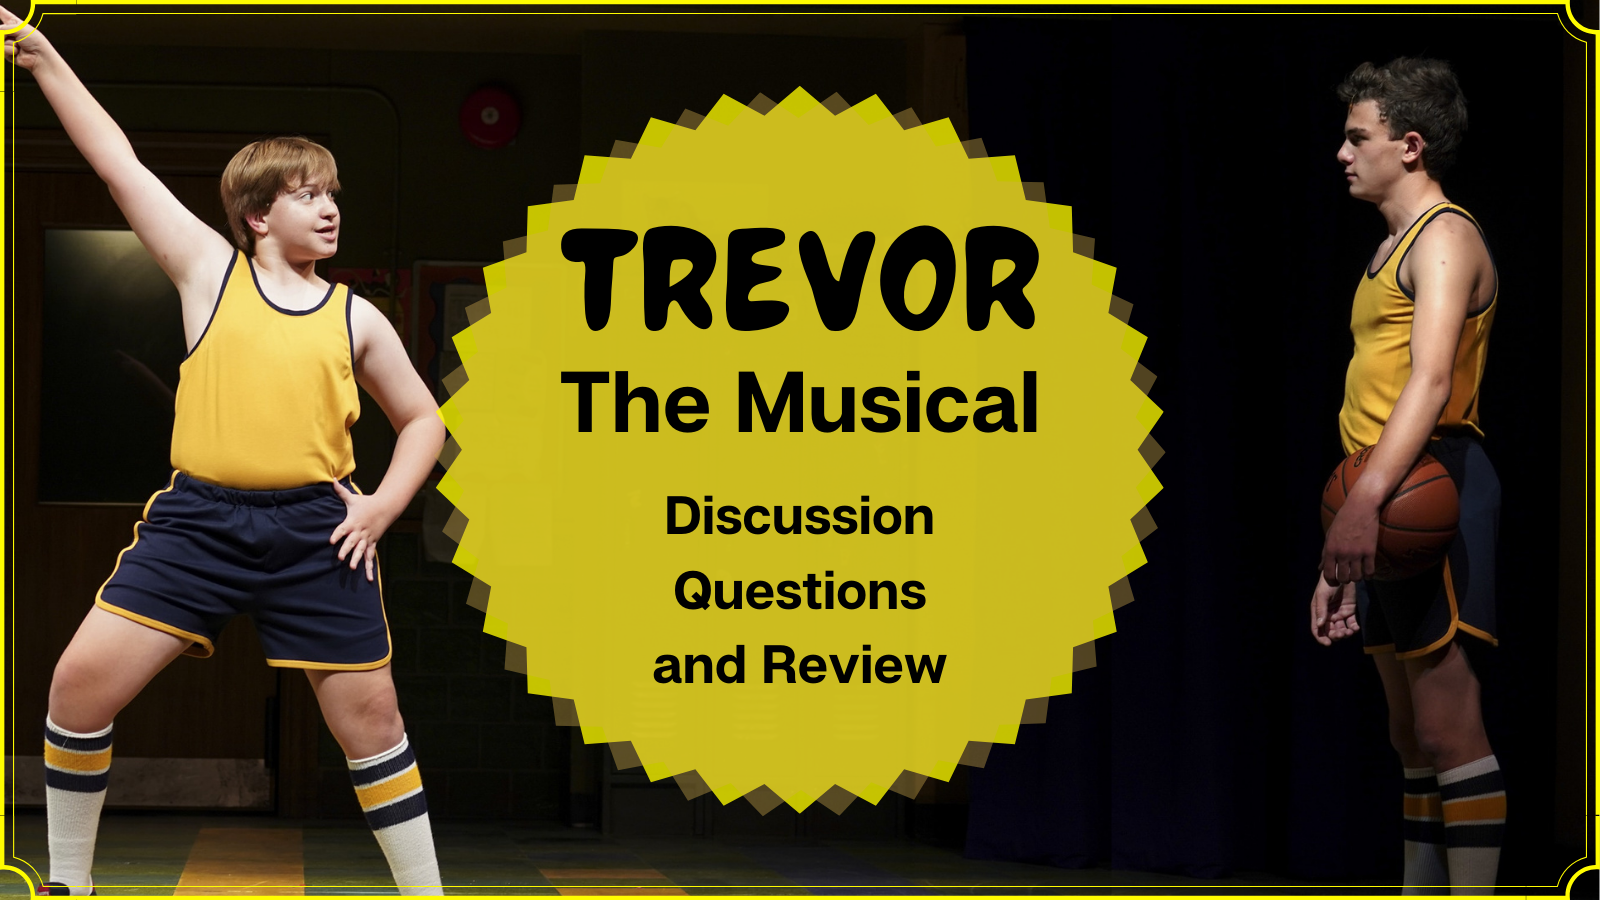 Trevor the Musical Discussion